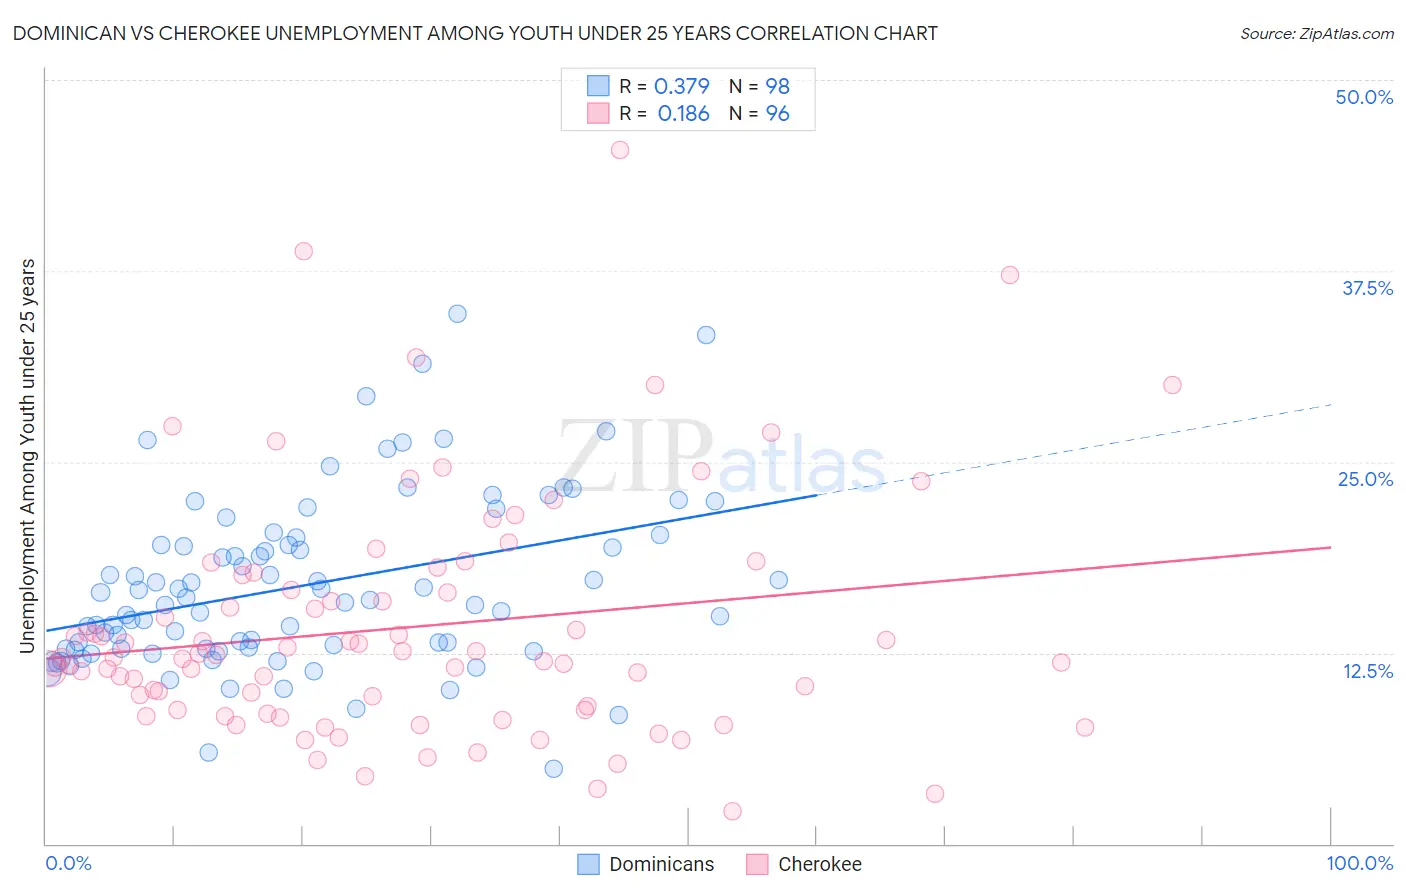 Dominican vs Cherokee Unemployment Among Youth under 25 years